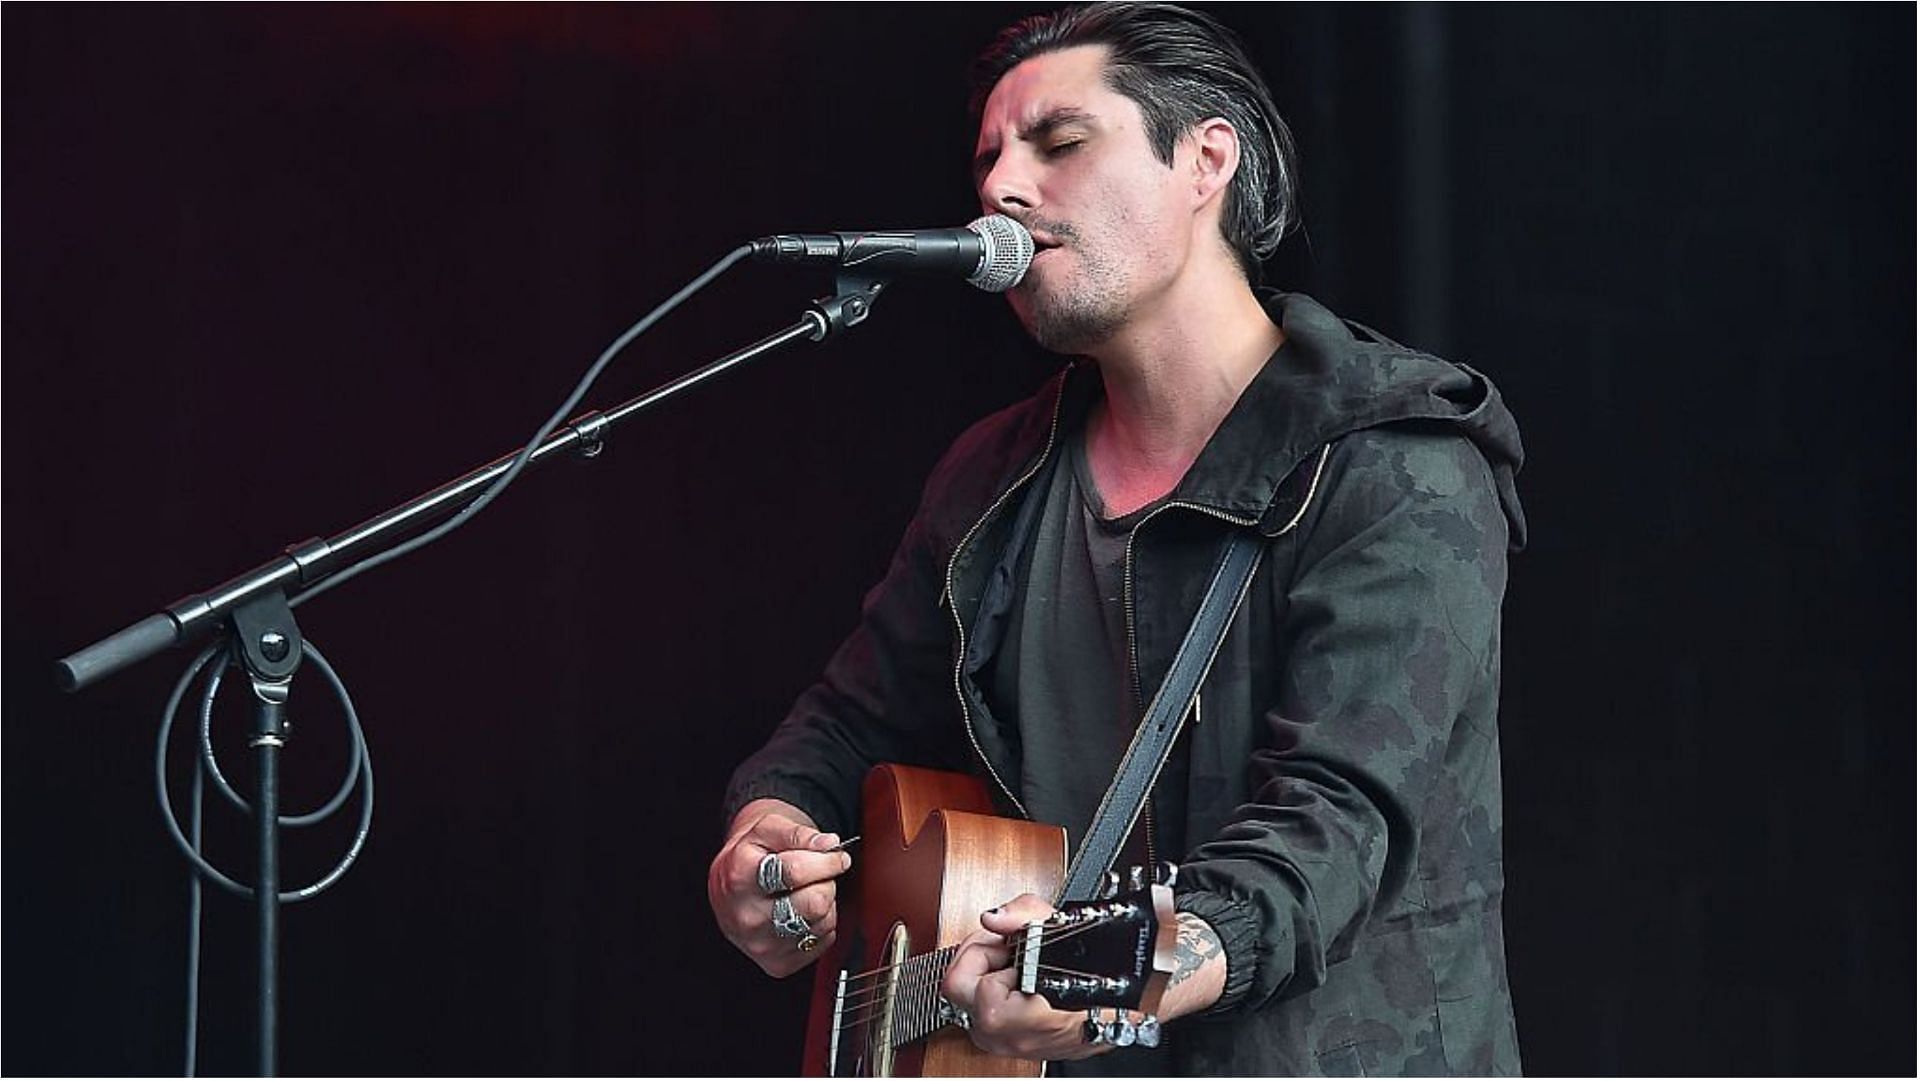 Ryan Karazija performs at Chastain Park Amphitheater (Image via Paras Griffin/Getty Images)